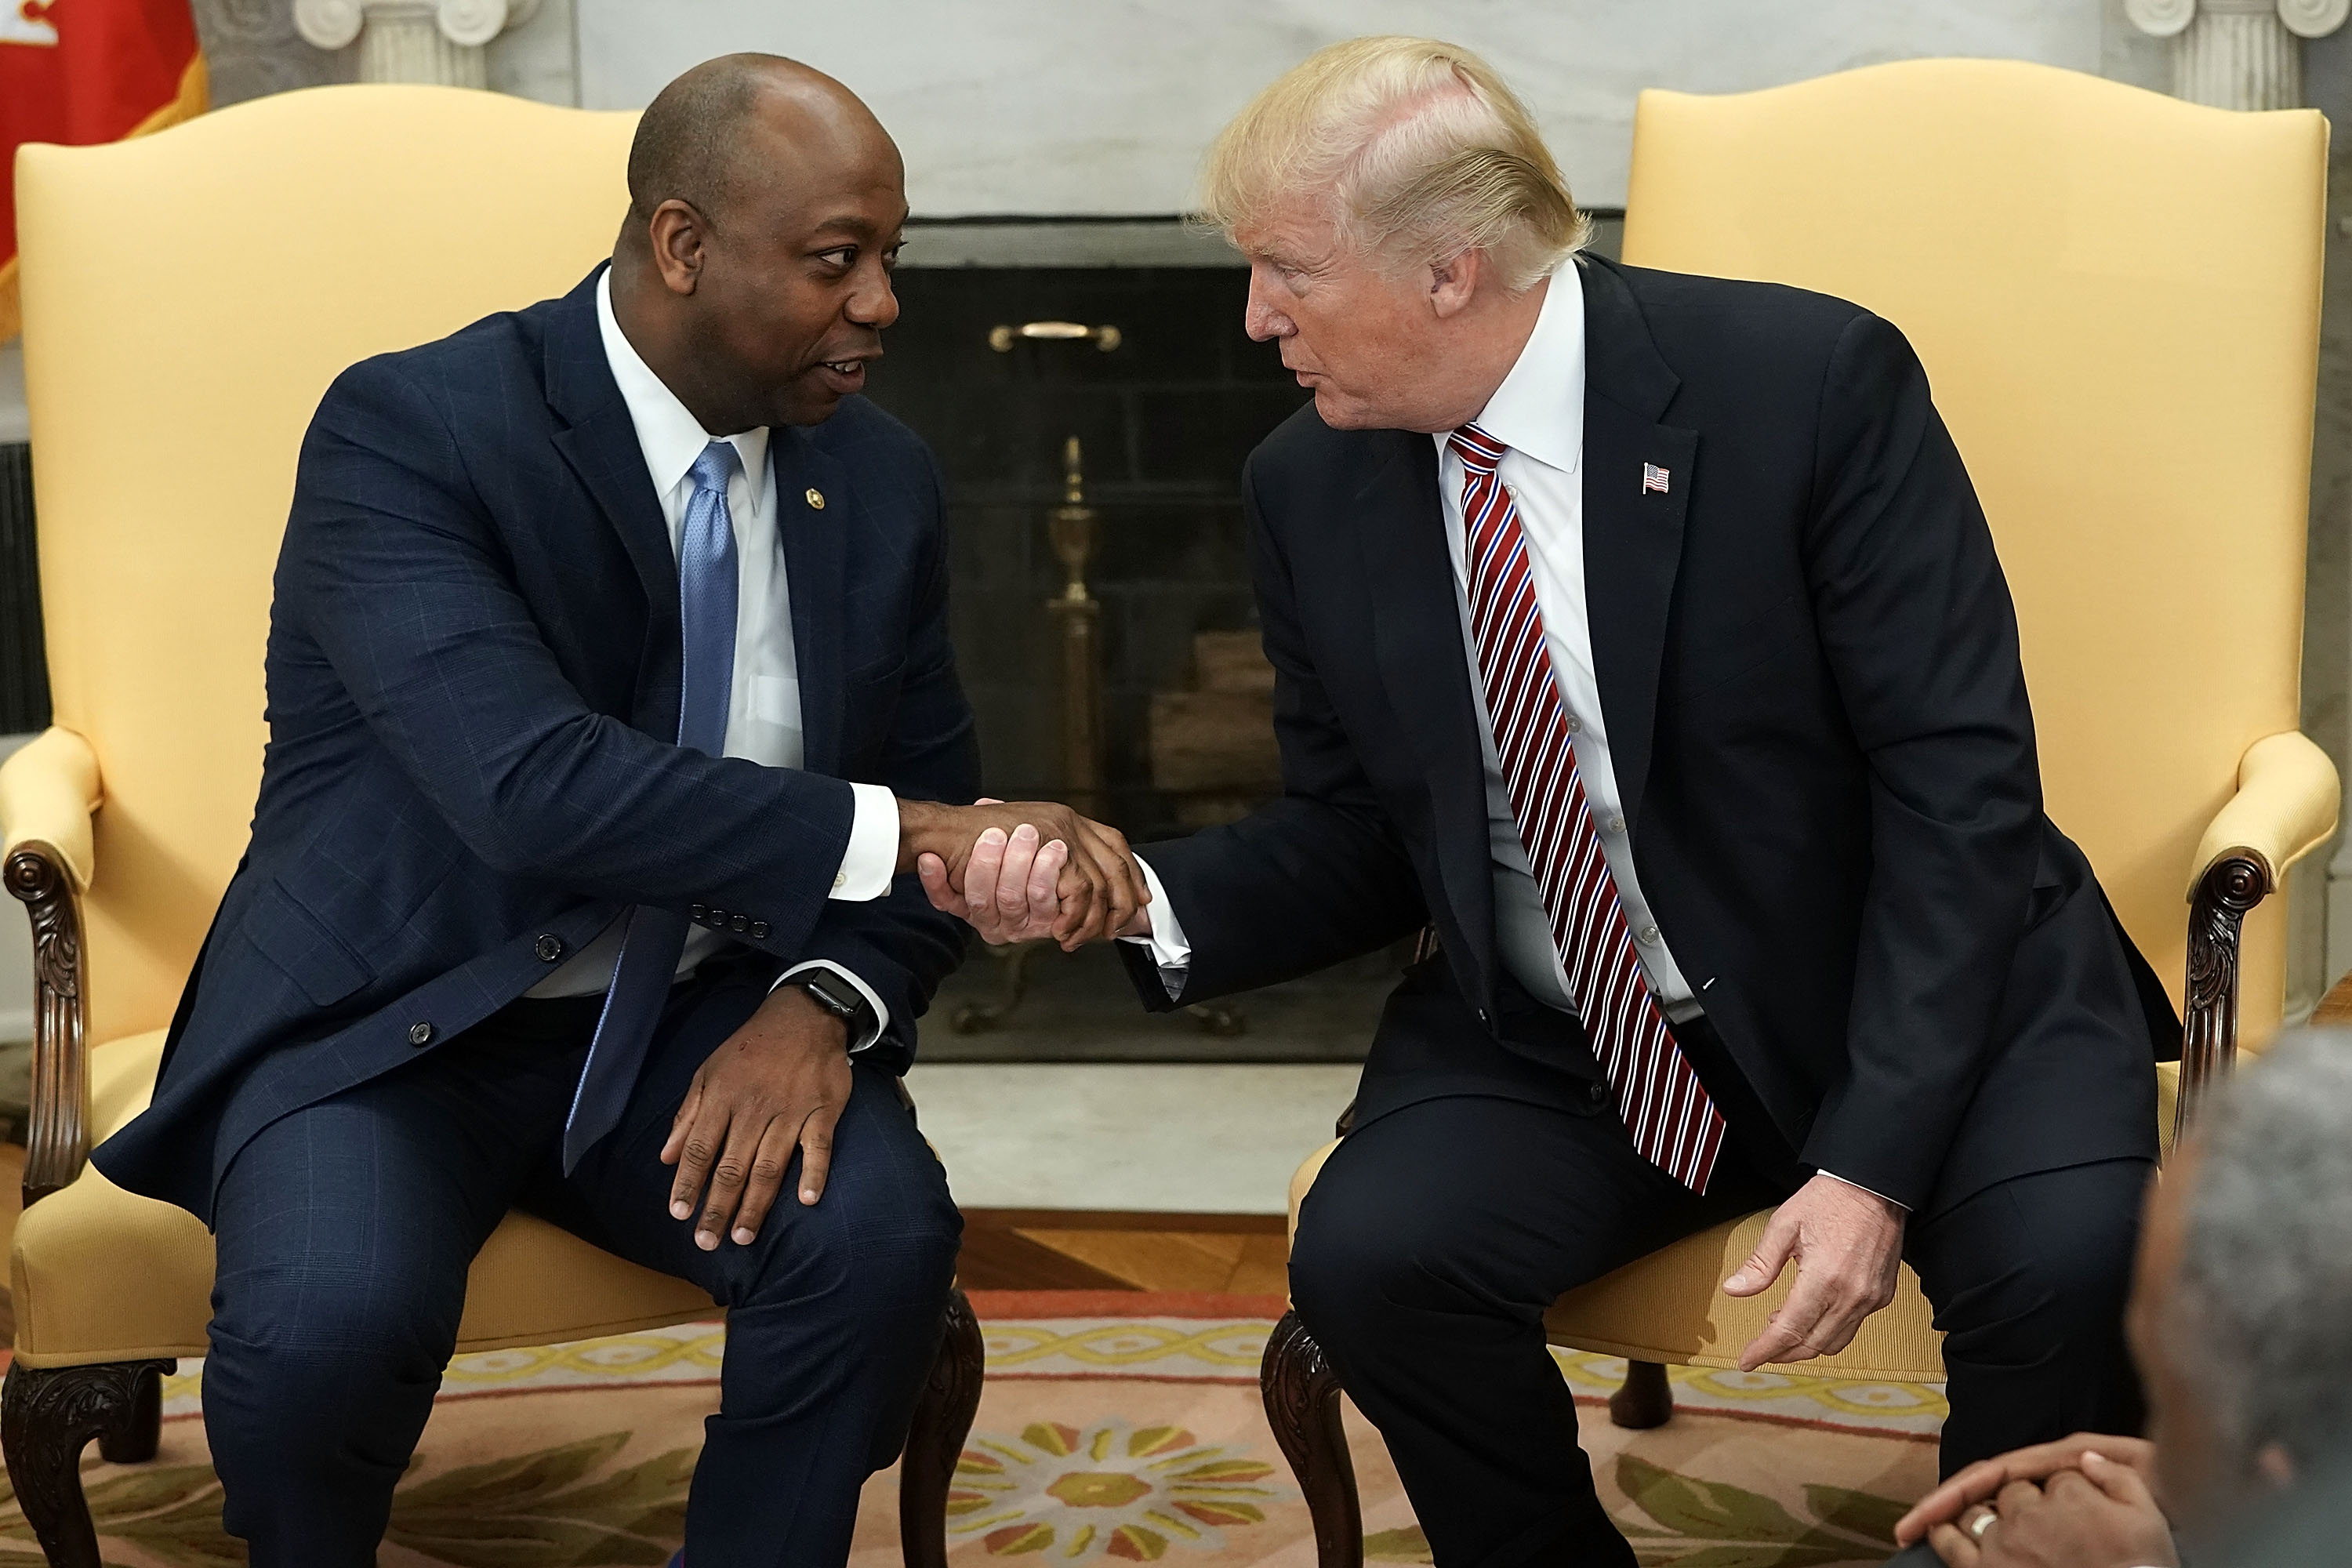 WASHINGTON, DC - FEBRUARY 14: U.S. President Donald Trump shakes hands with Sen. Tim Scott (R-SC) during a working session regarding the Opportunity Zones provided by tax reform in the Oval Office of the White House February 14, 2018 in Washington, DC. President Trump hosted a group of local elected officials, entrepreneurs, and investors to discuss "how the 'Opportunity Zones' designation in the Tax Cuts and Jobs Act will spur investment and job growth in distressed communities." (Photo by Alex Wong/Getty Images)